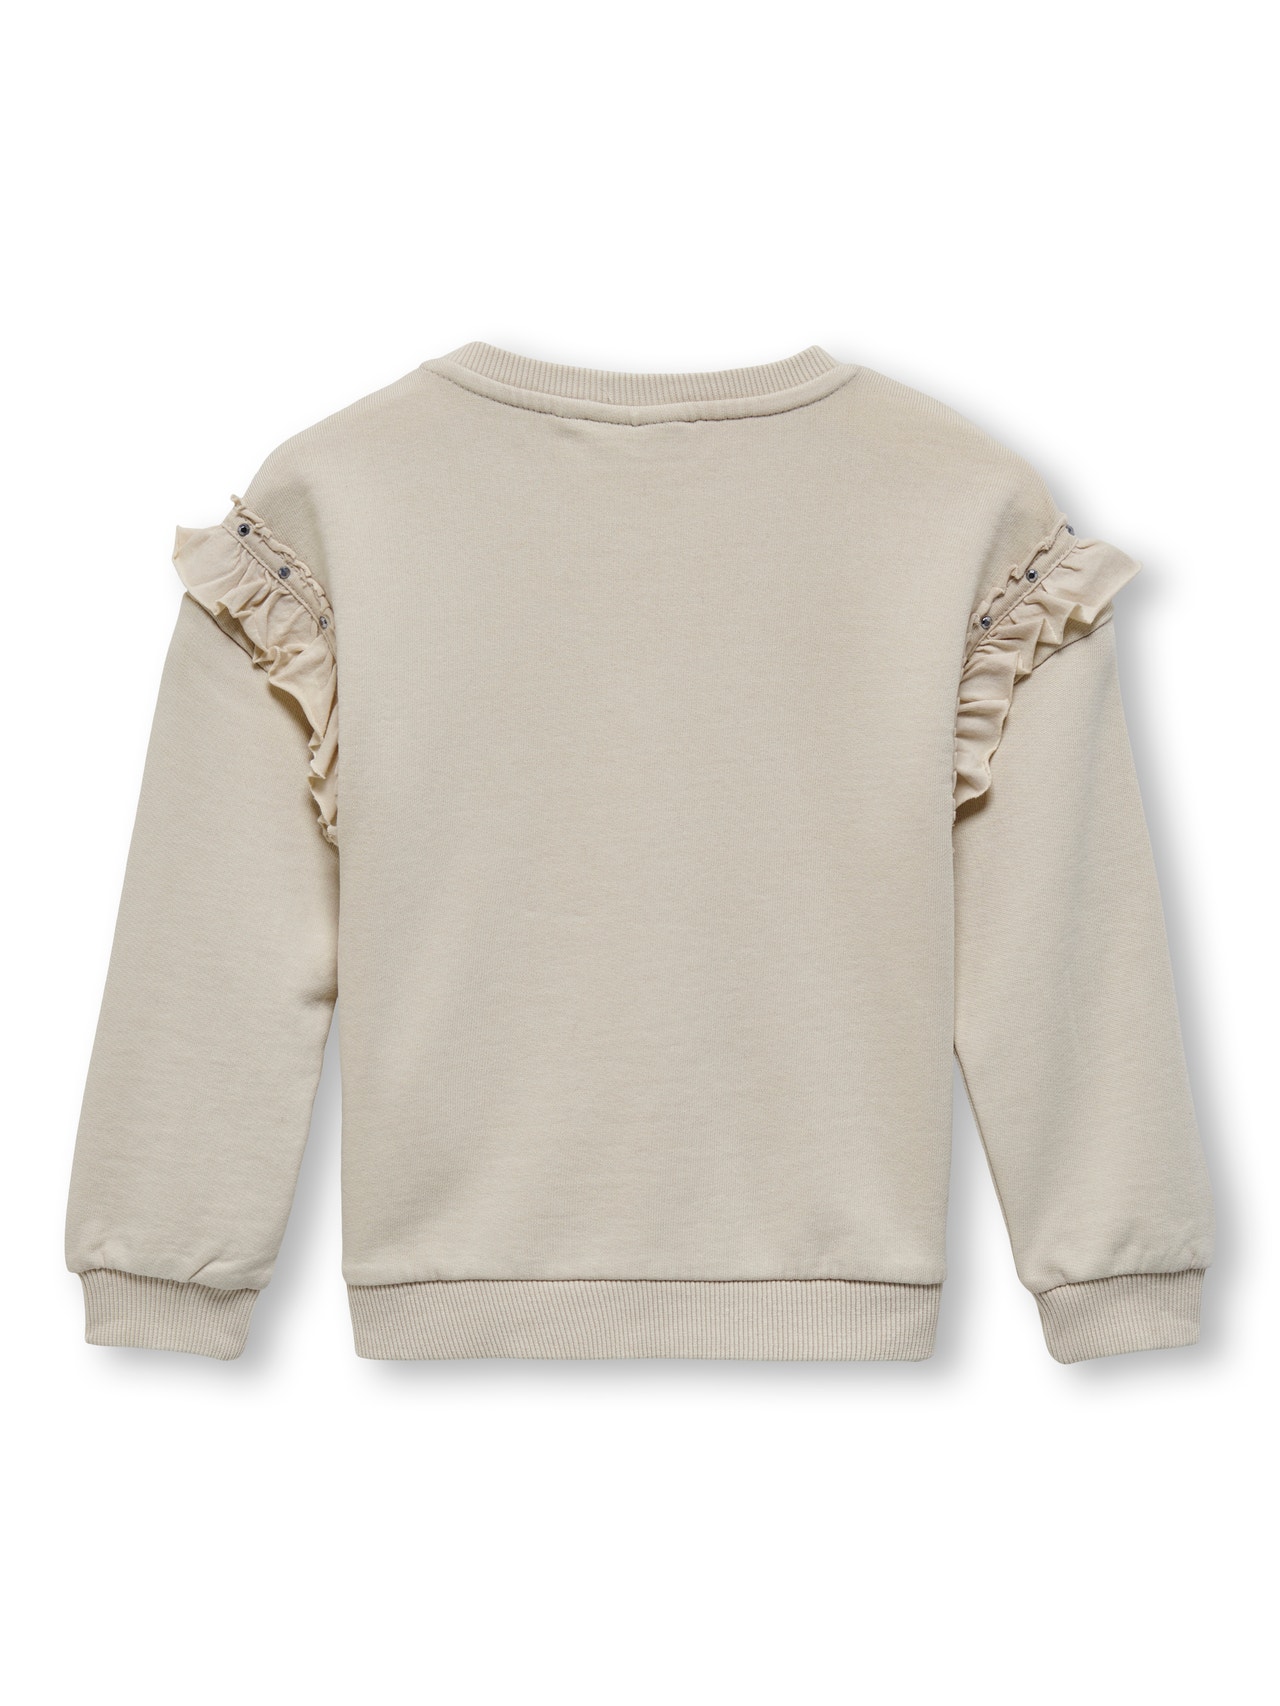 ONLY Regular Fit Round Neck Dropped shoulders Sweatshirts -Pumice Stone - 15278303